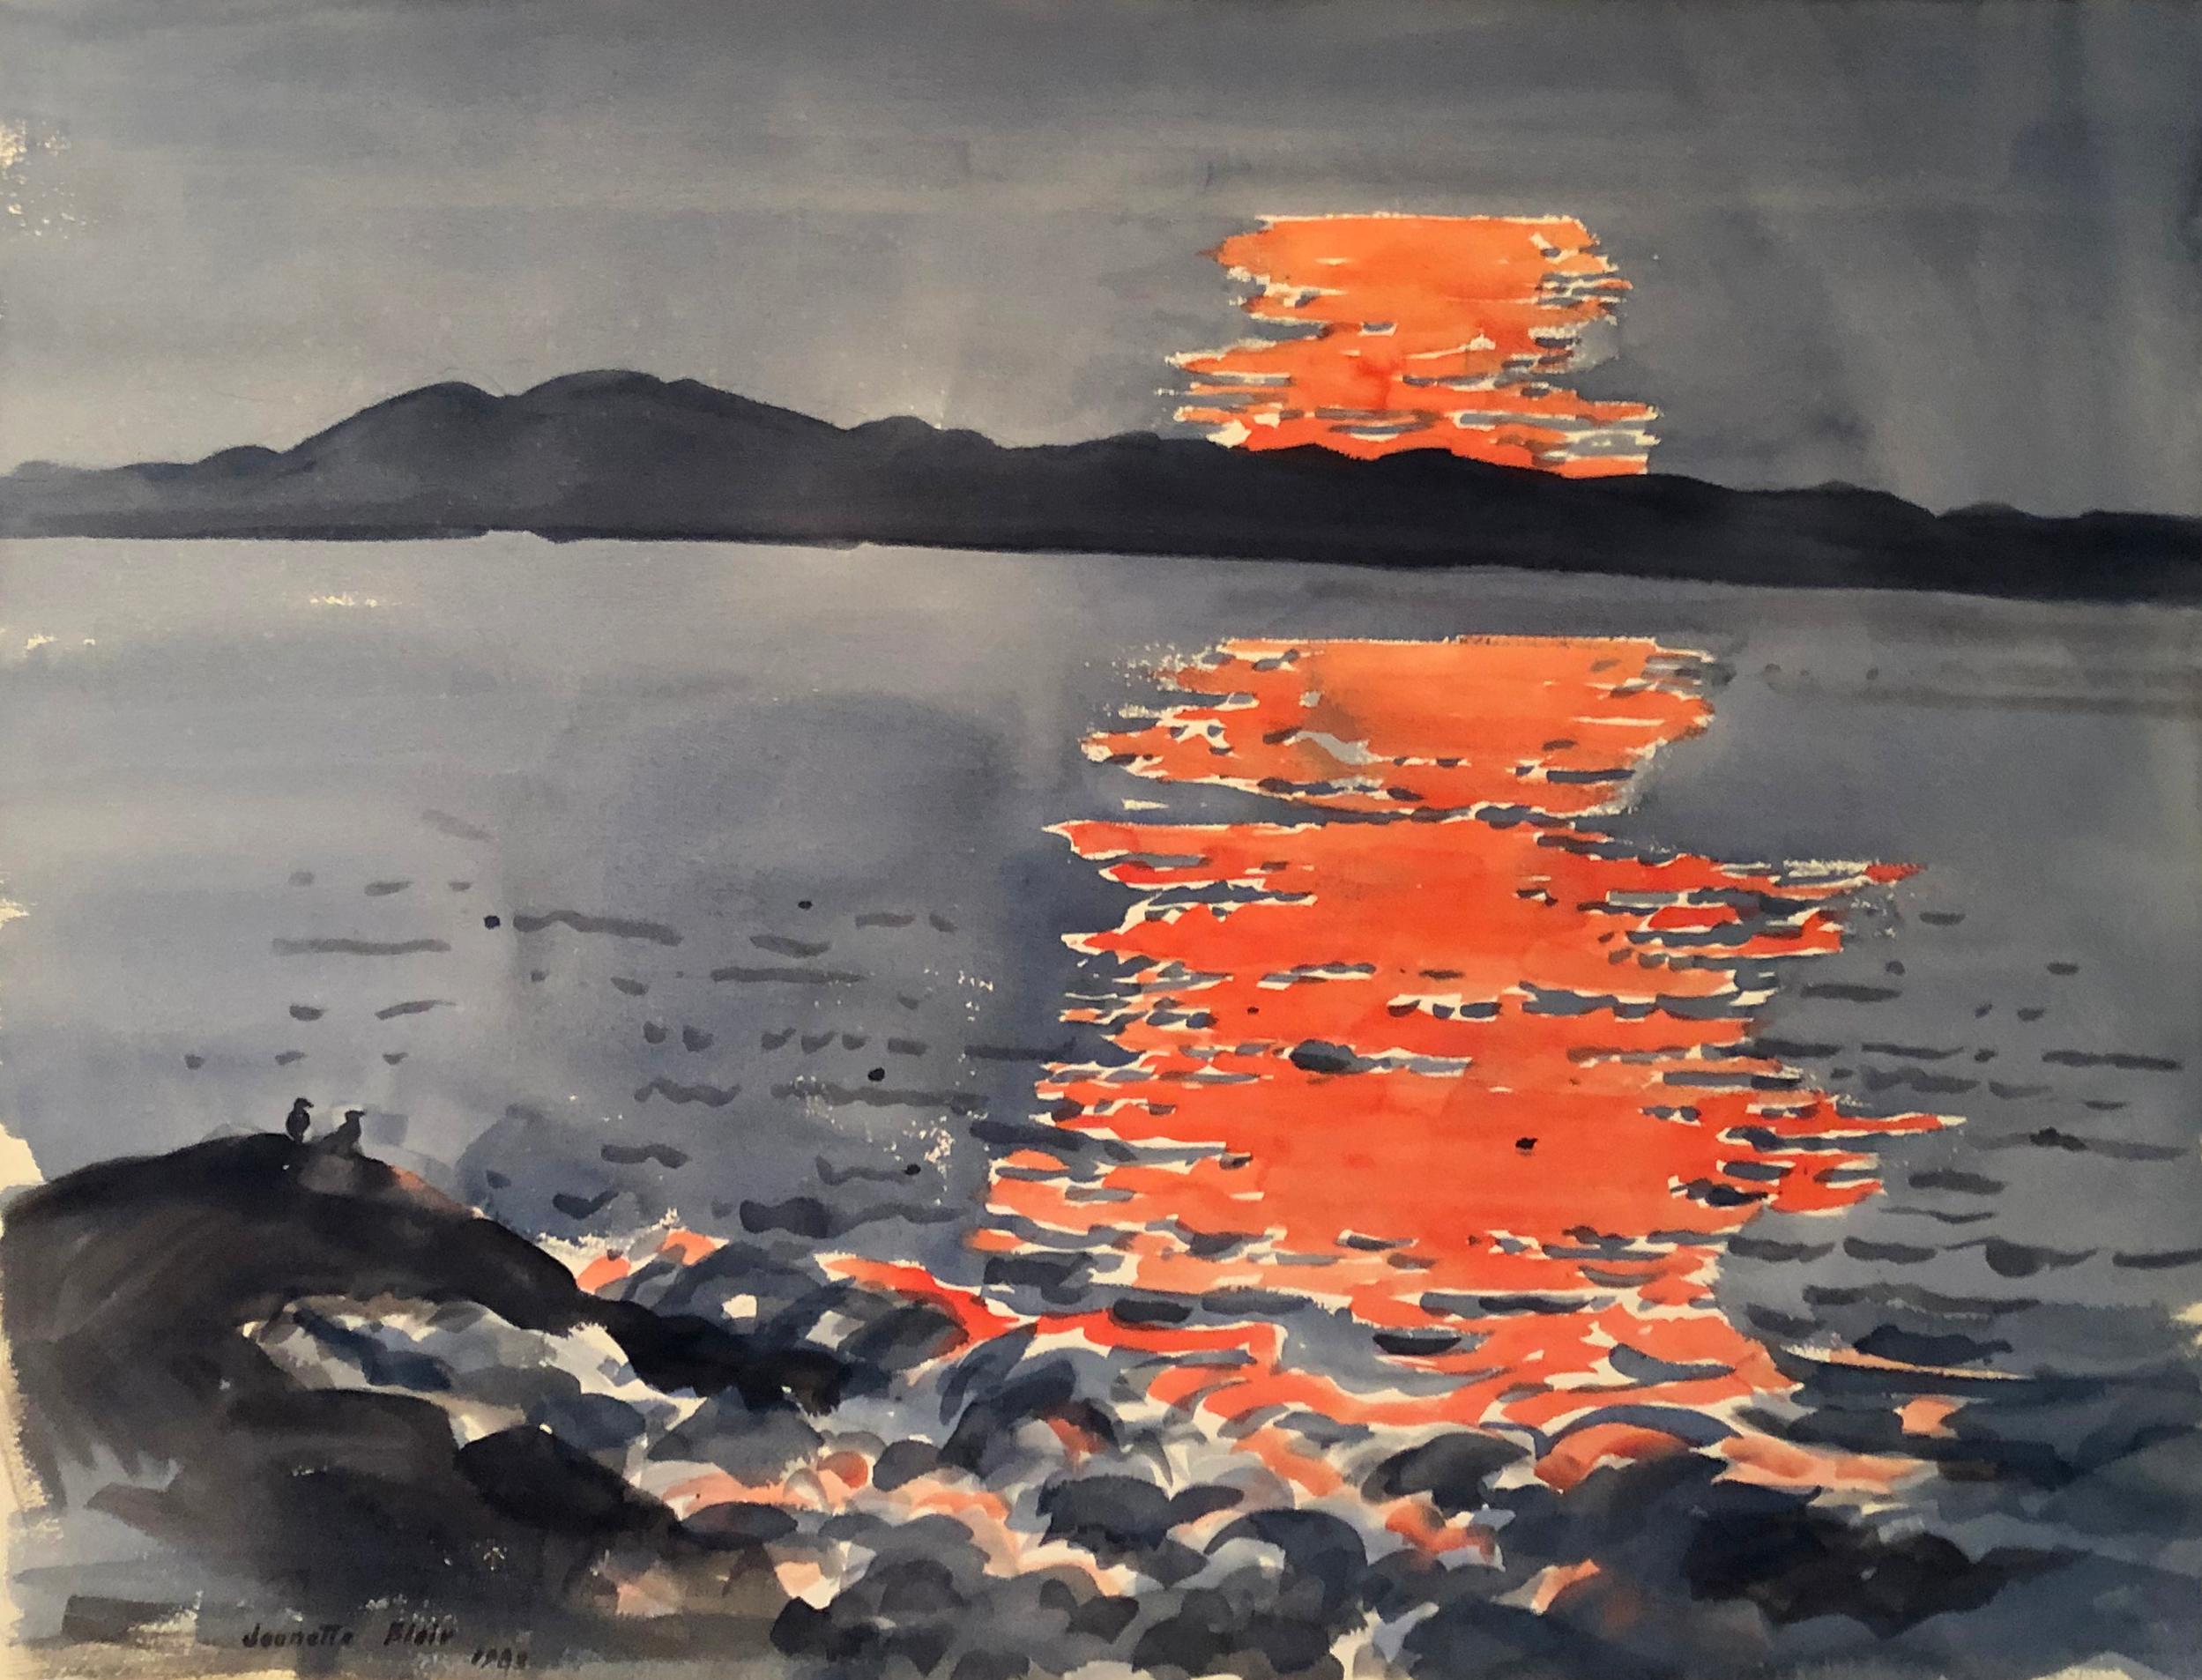 An original watercolor by American Modernist painter Jeanette Blair depicting a sunset over Lake Erie, created Circa 1988.

This painting comes with a contemporary black wood square profile frame presentation.

Blair (1922-2016 ) was a watercolorist